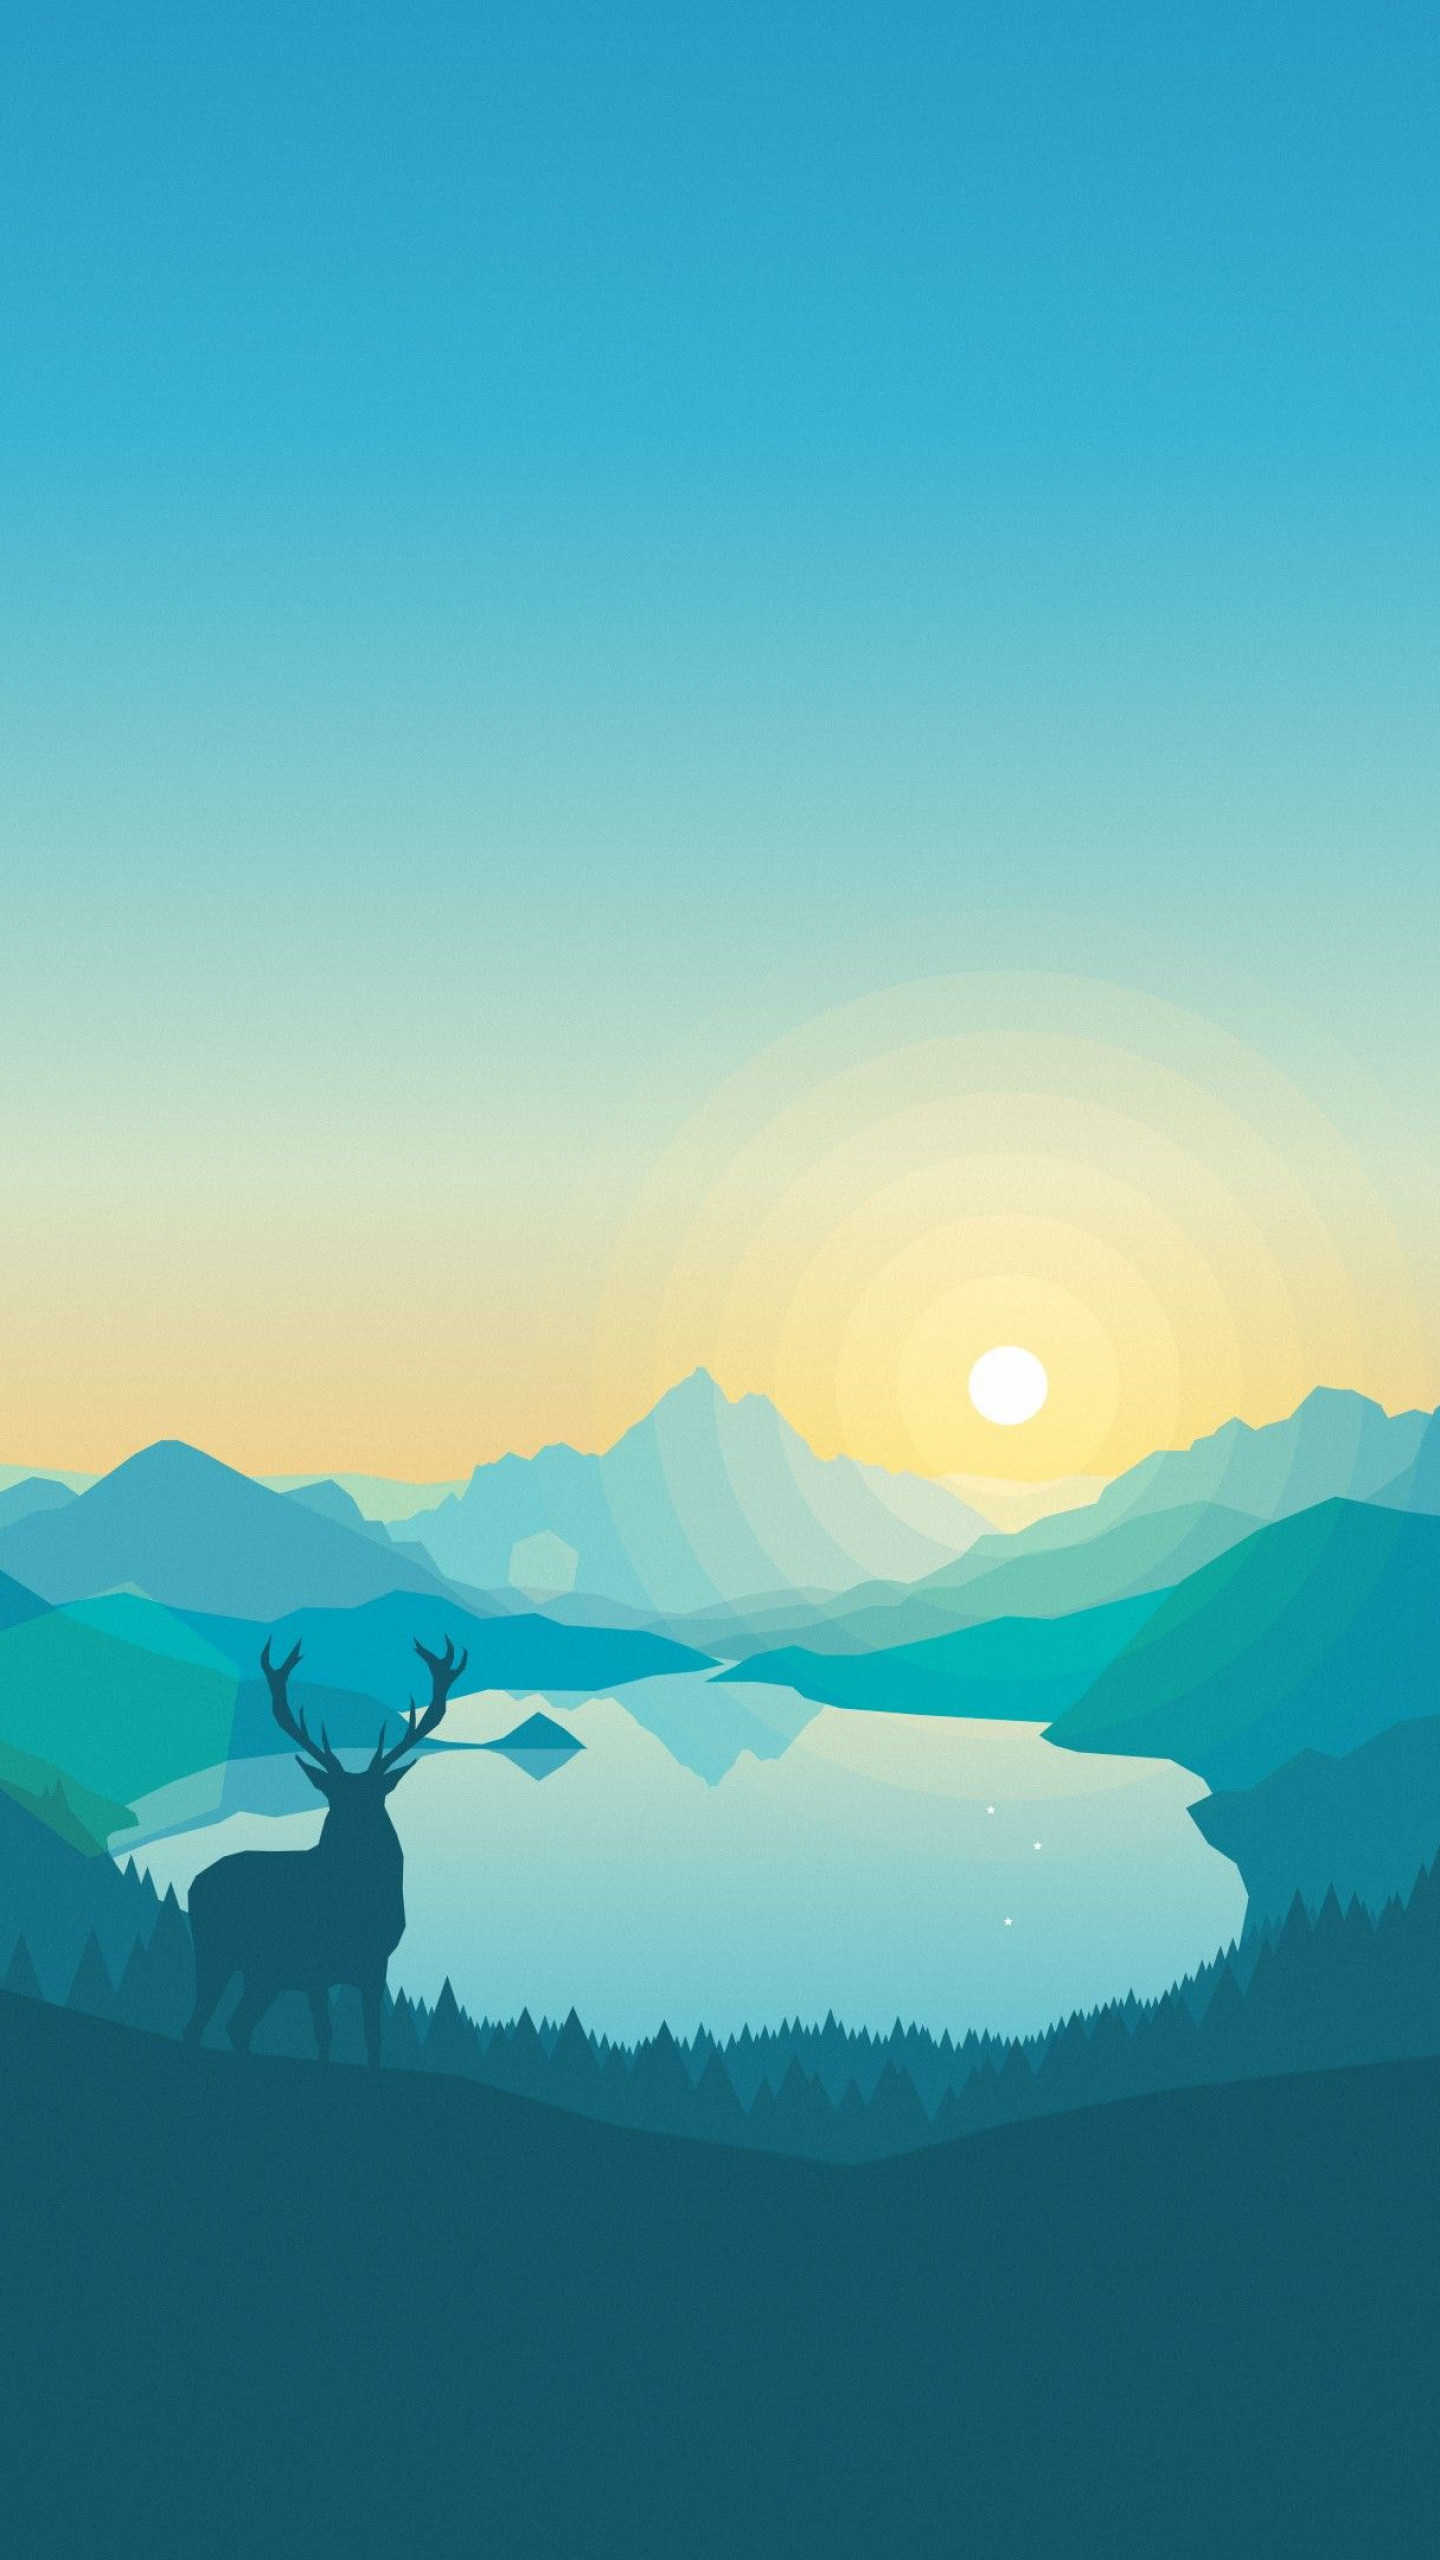 620+ Deer HD Wallpapers and Backgrounds